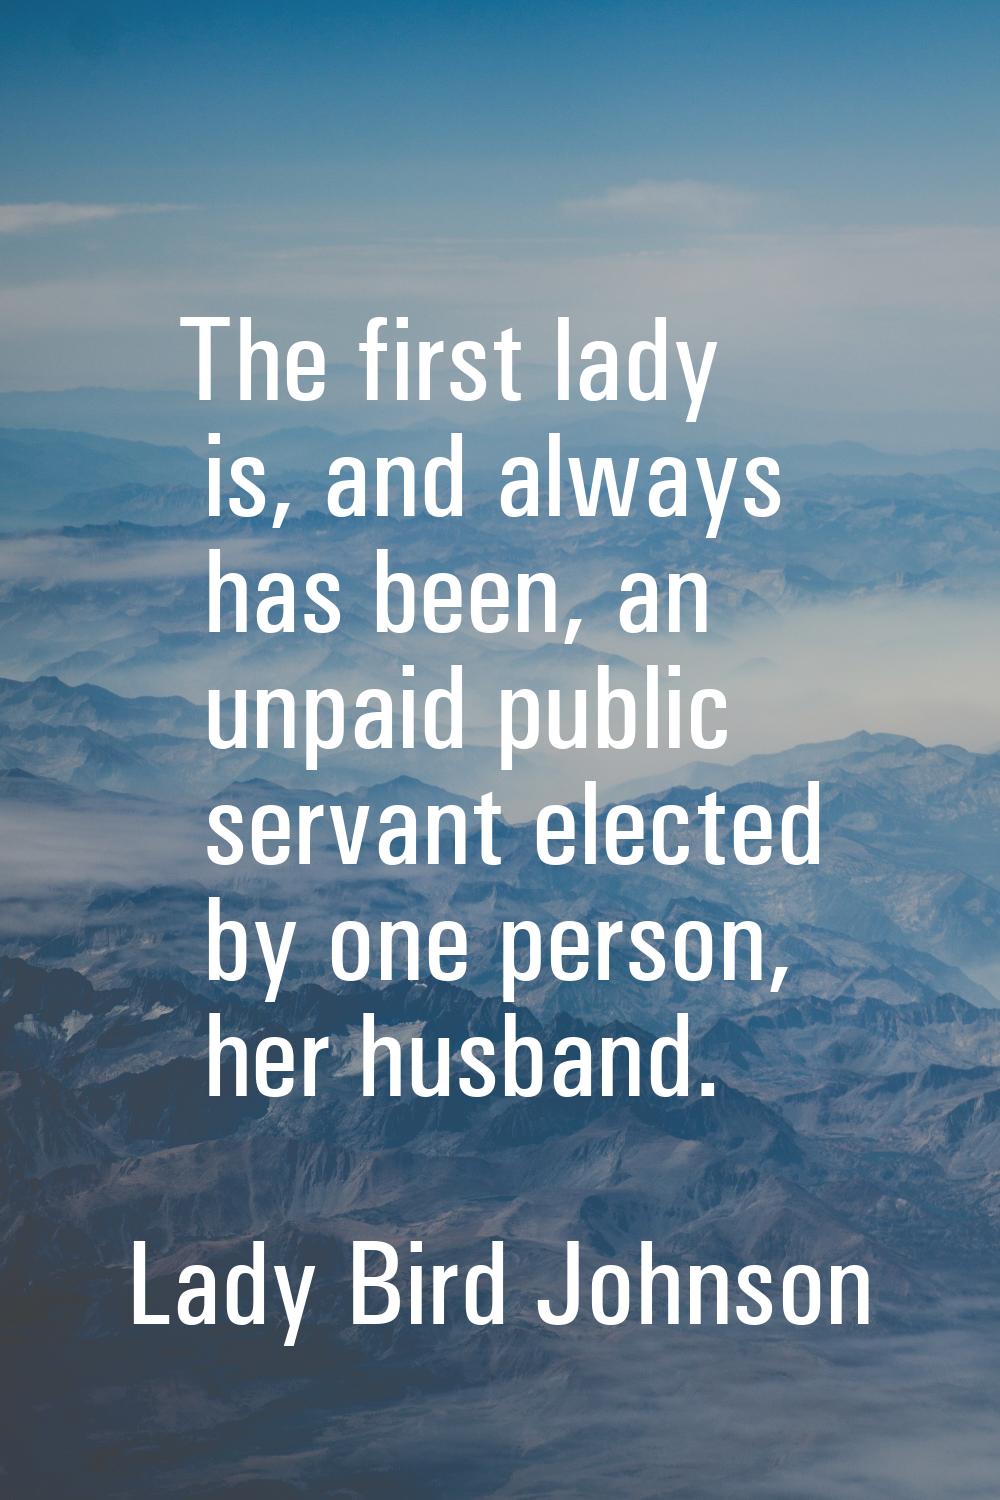 The first lady is, and always has been, an unpaid public servant elected by one person, her husband